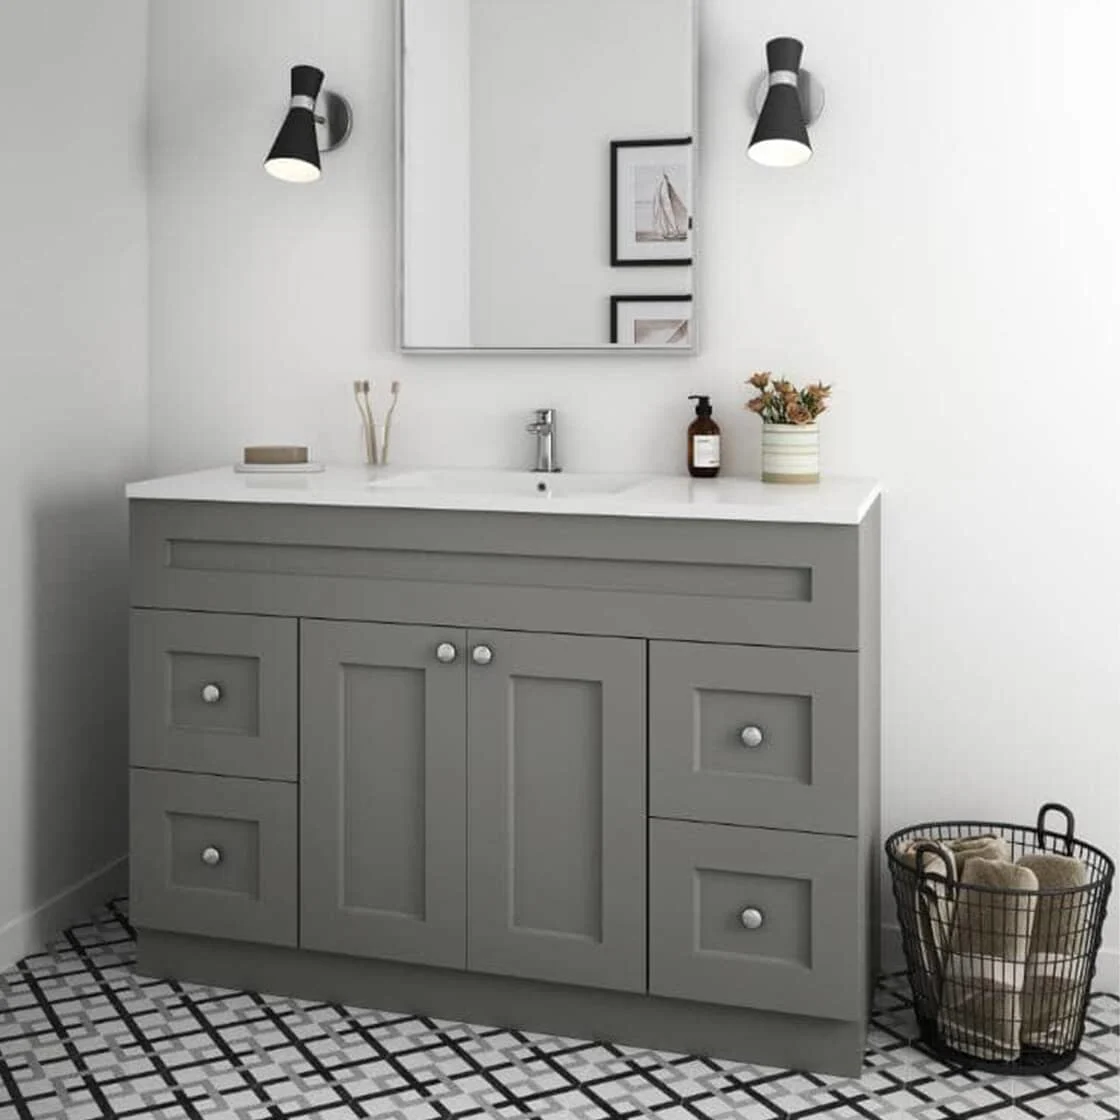 Bathroom vanity with minimal things on the counter